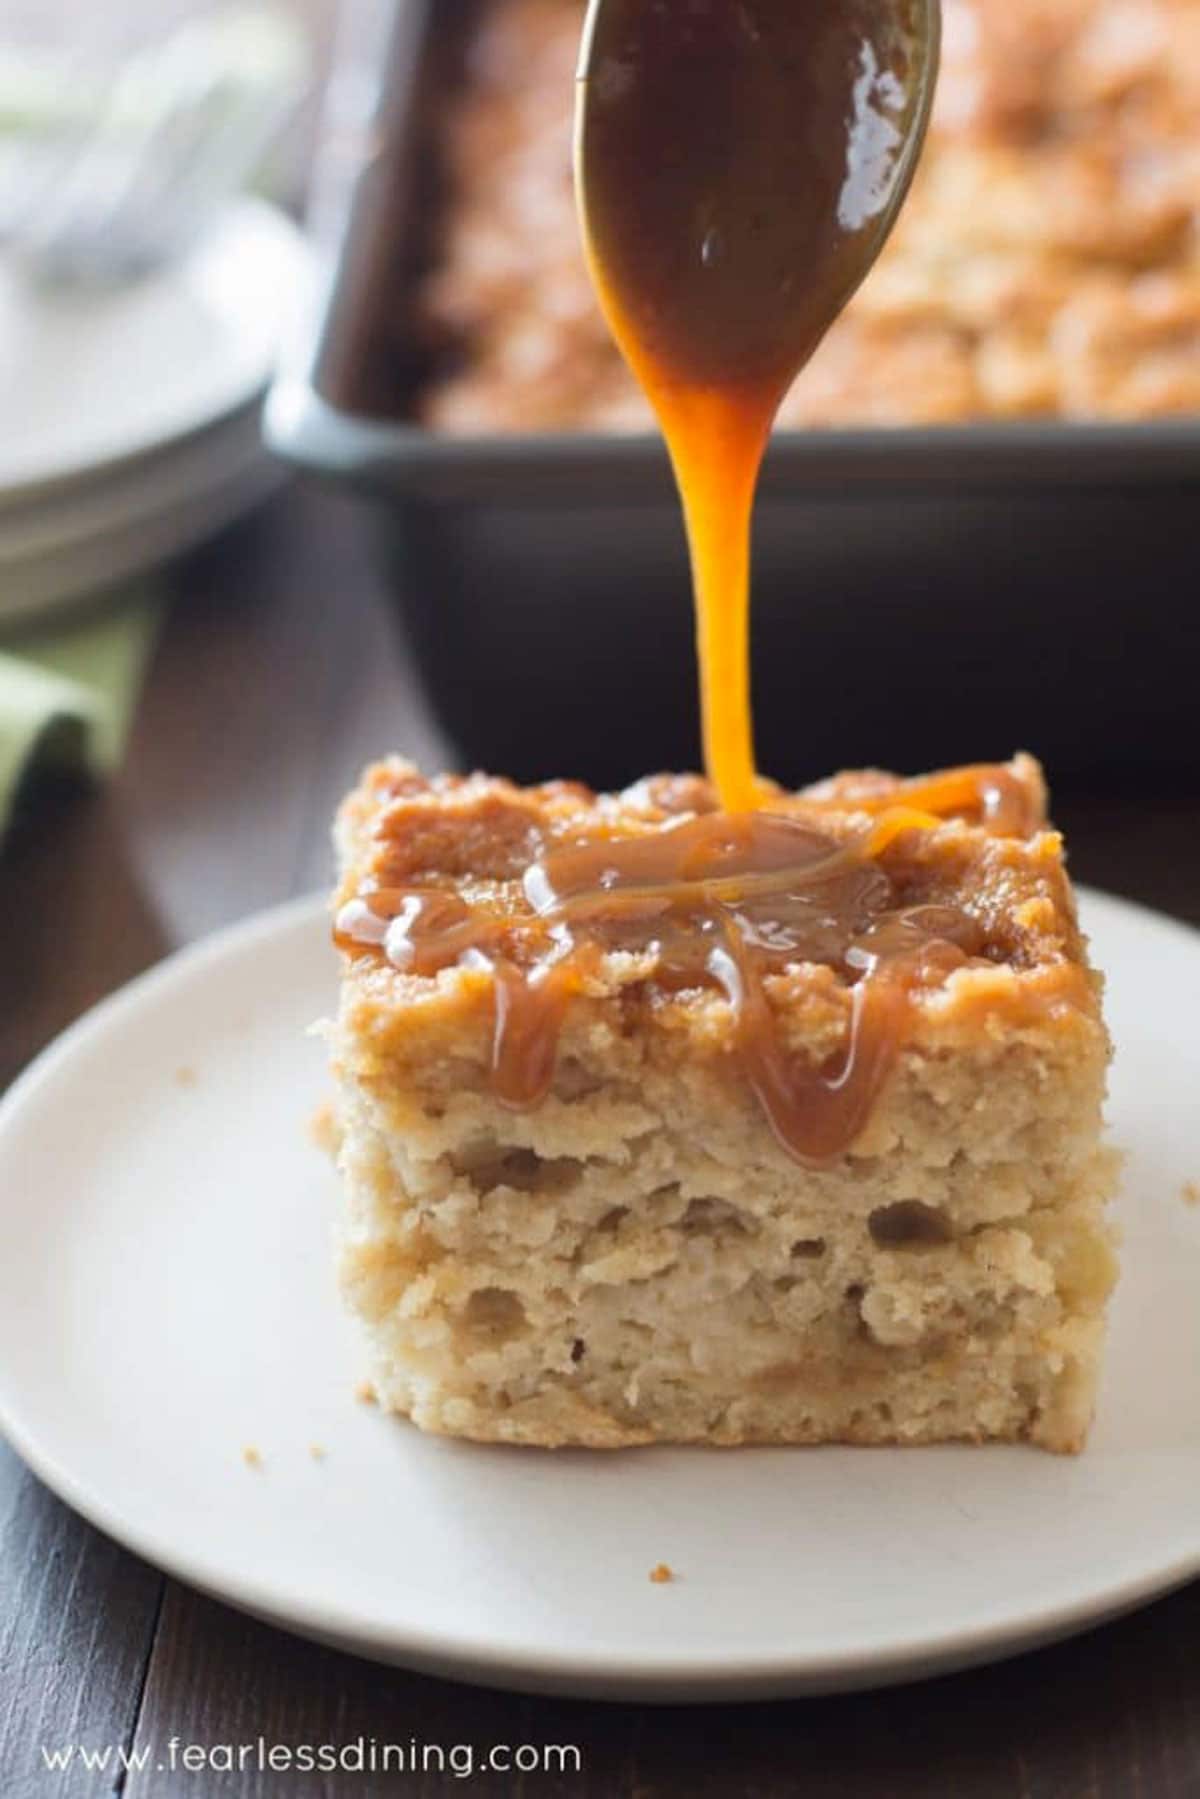 a slice of caramel apple cake with caramel being drizzled over the top